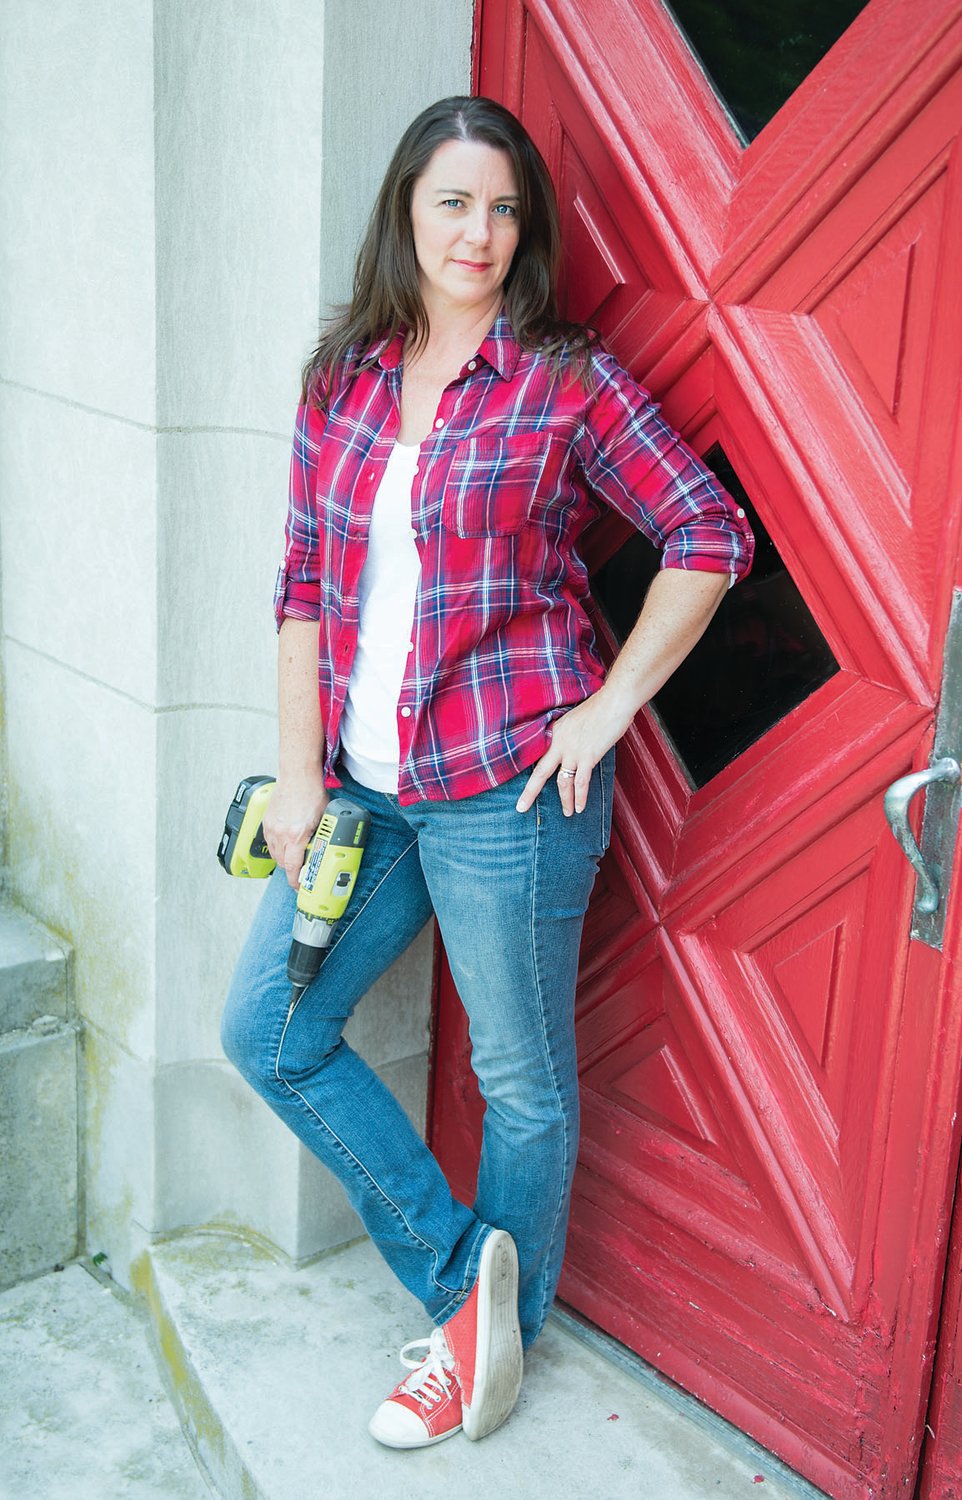 Beth Allen knows how to work on homes. She will be at the Mercer Museum Nov. 14.